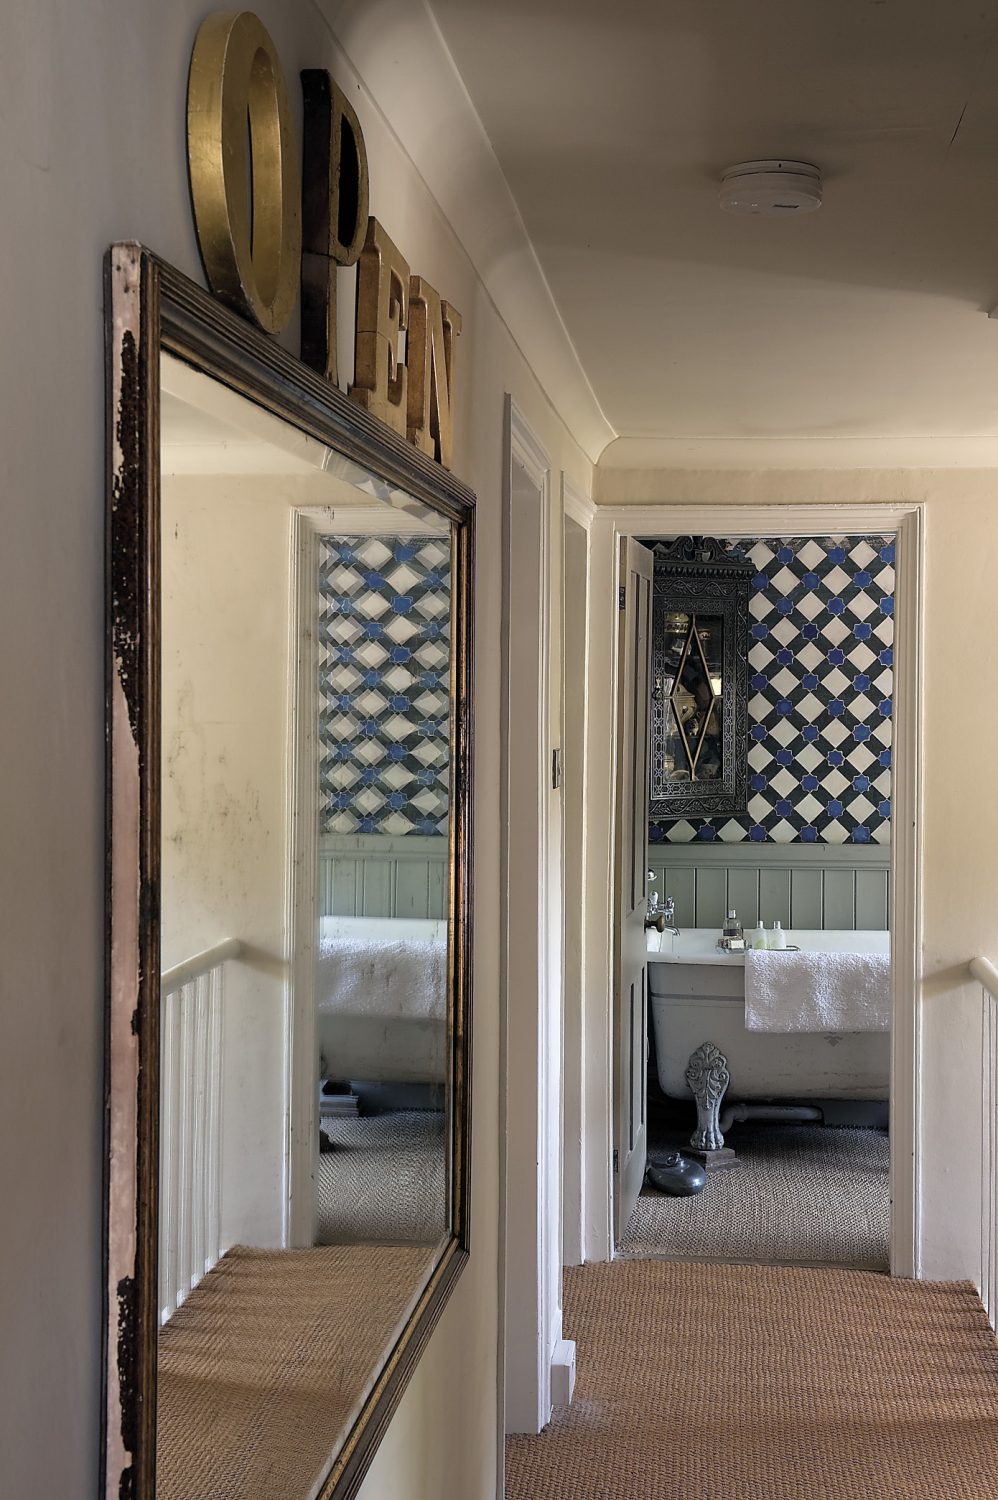 The view into the bathroom, past a huge gilt mirror